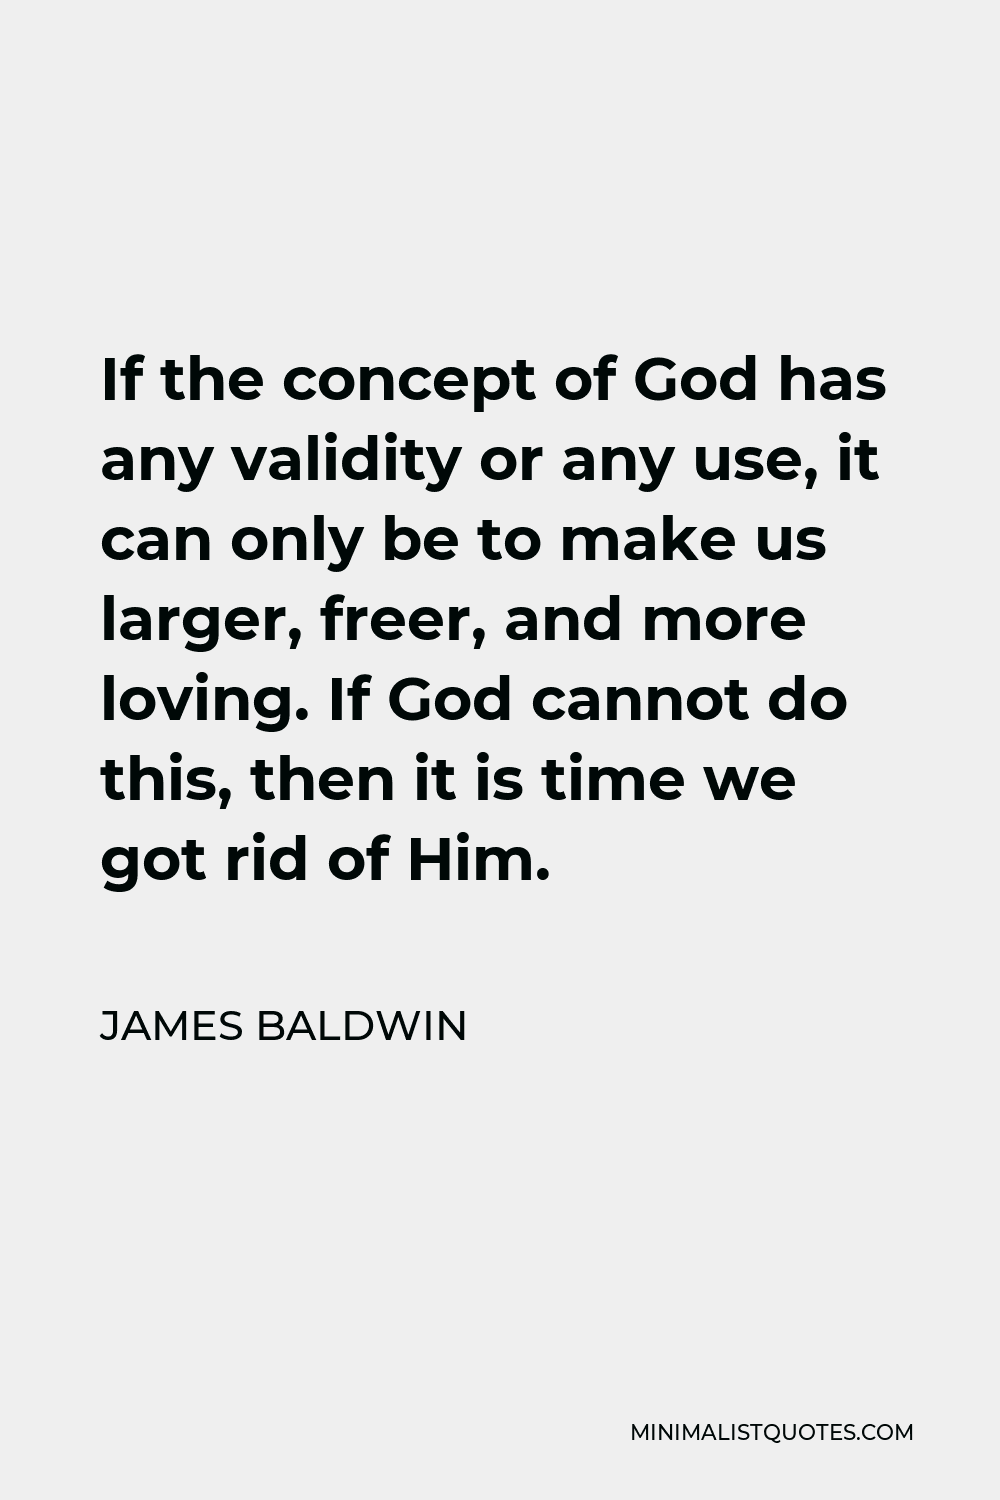 James Baldwin Quote - If the concept of God has any validity or any use, it can only be to make us larger, freer, and more loving. If God cannot do this, then it is time we got rid of Him.